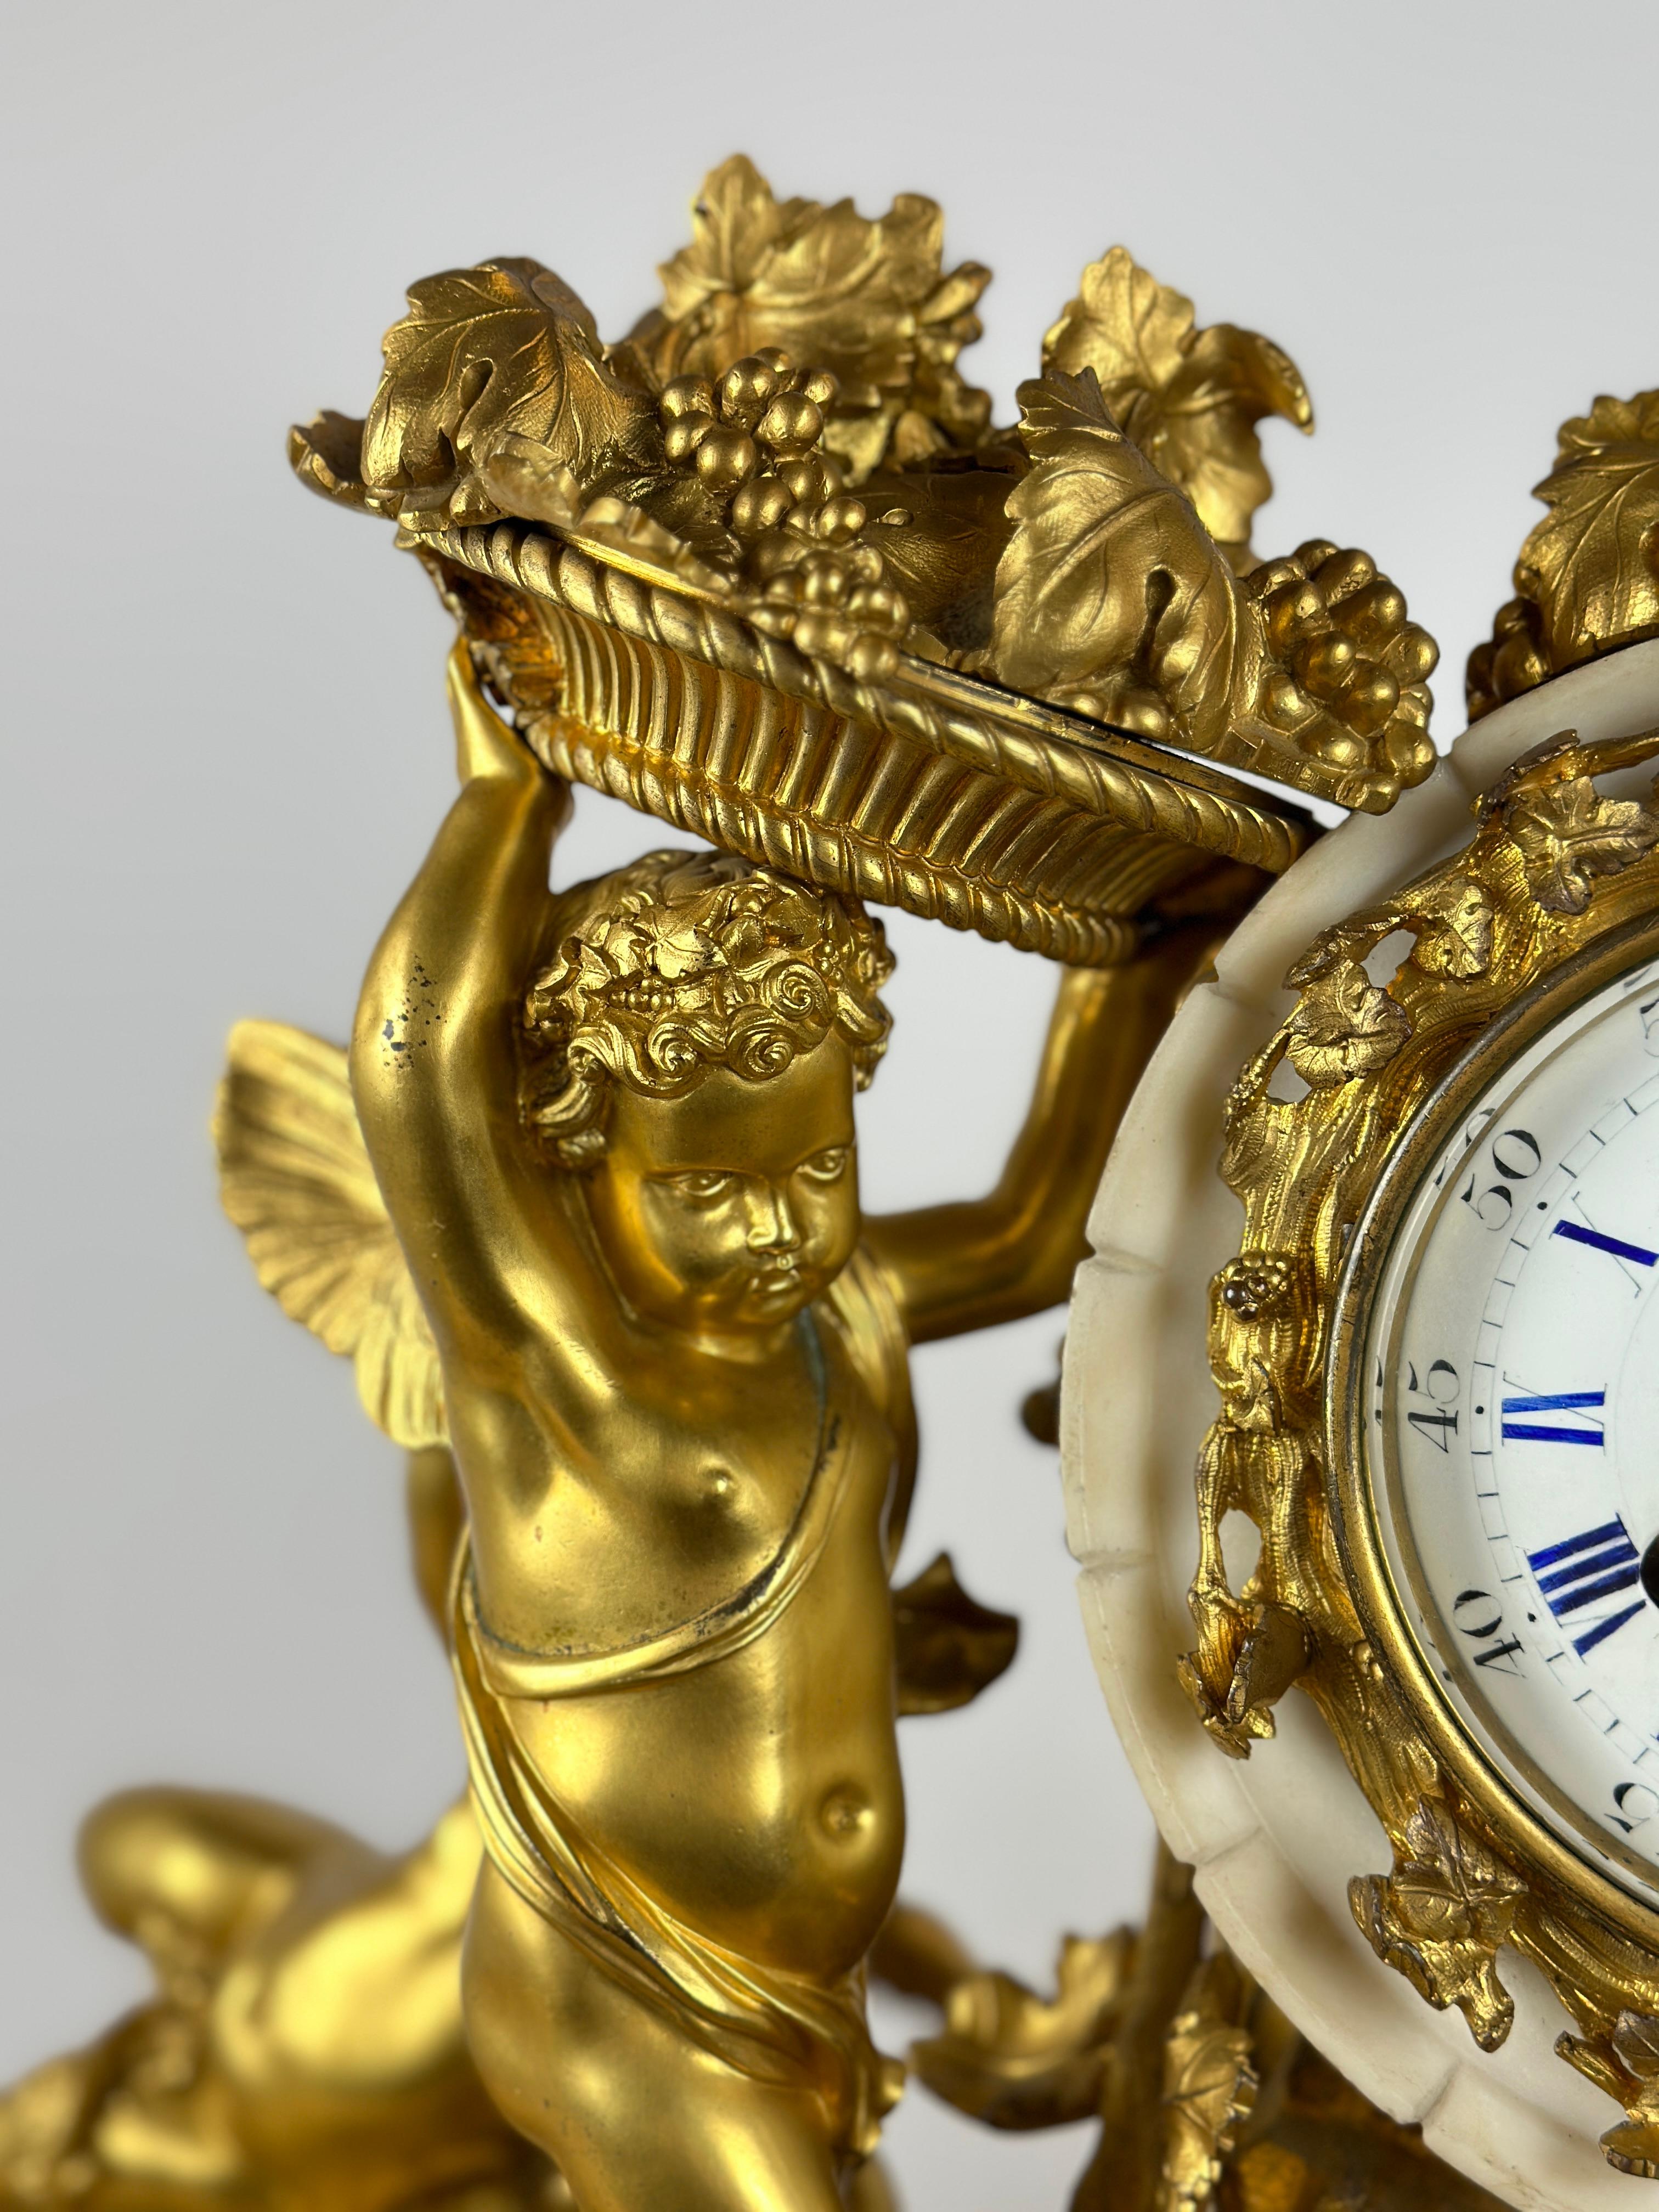 Important Lerolle Freres Clock 5 Putti Figures 19th Century For Sale 8